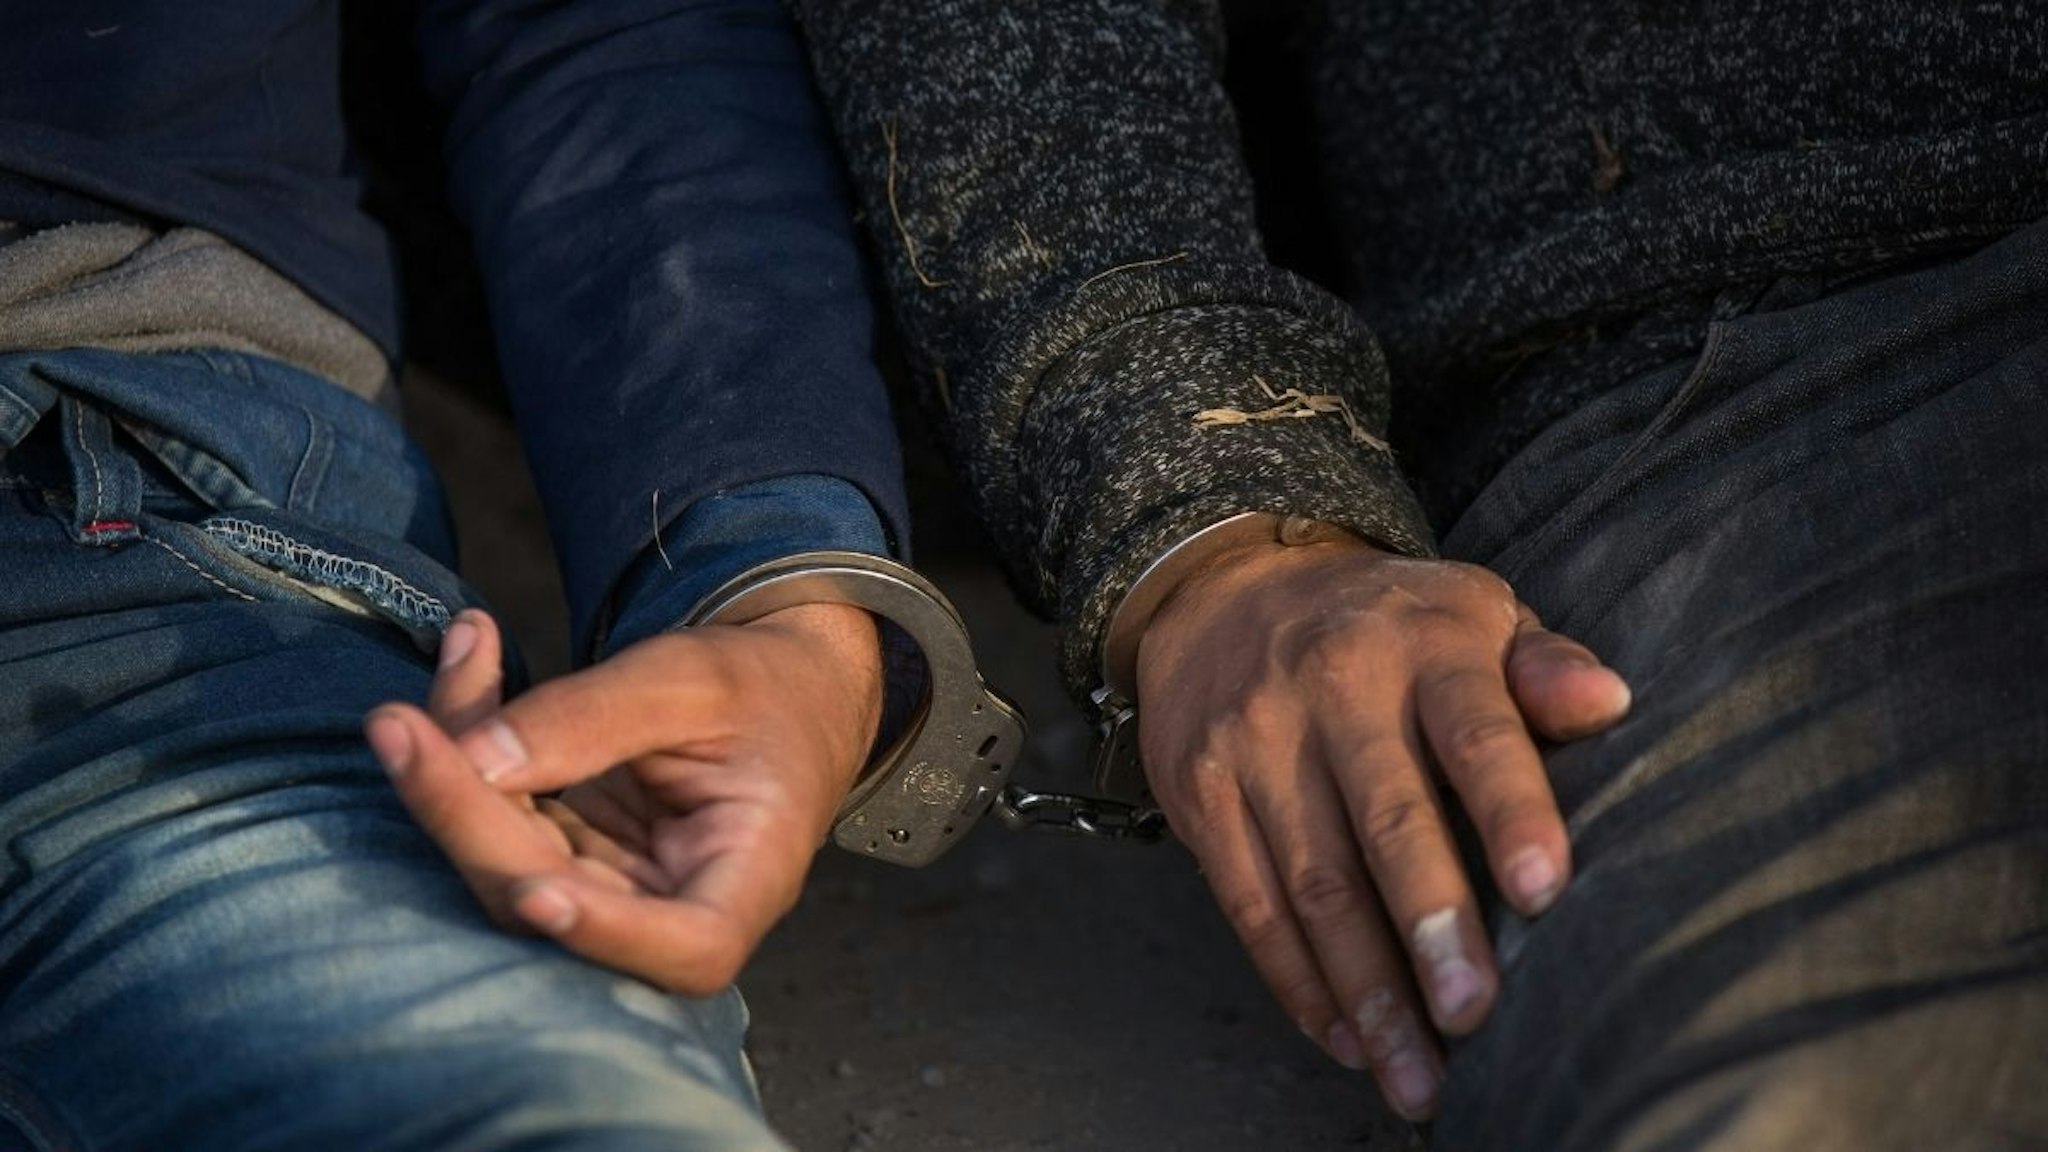 After being apprehended by Border Patrol, illegal immigrants wait to be transported to a central processing center shortly after they crossed the border from Mexico into the United States on Monday, March 26, 2018 in the Rio Grande Valley Sector near McAllen, Texas